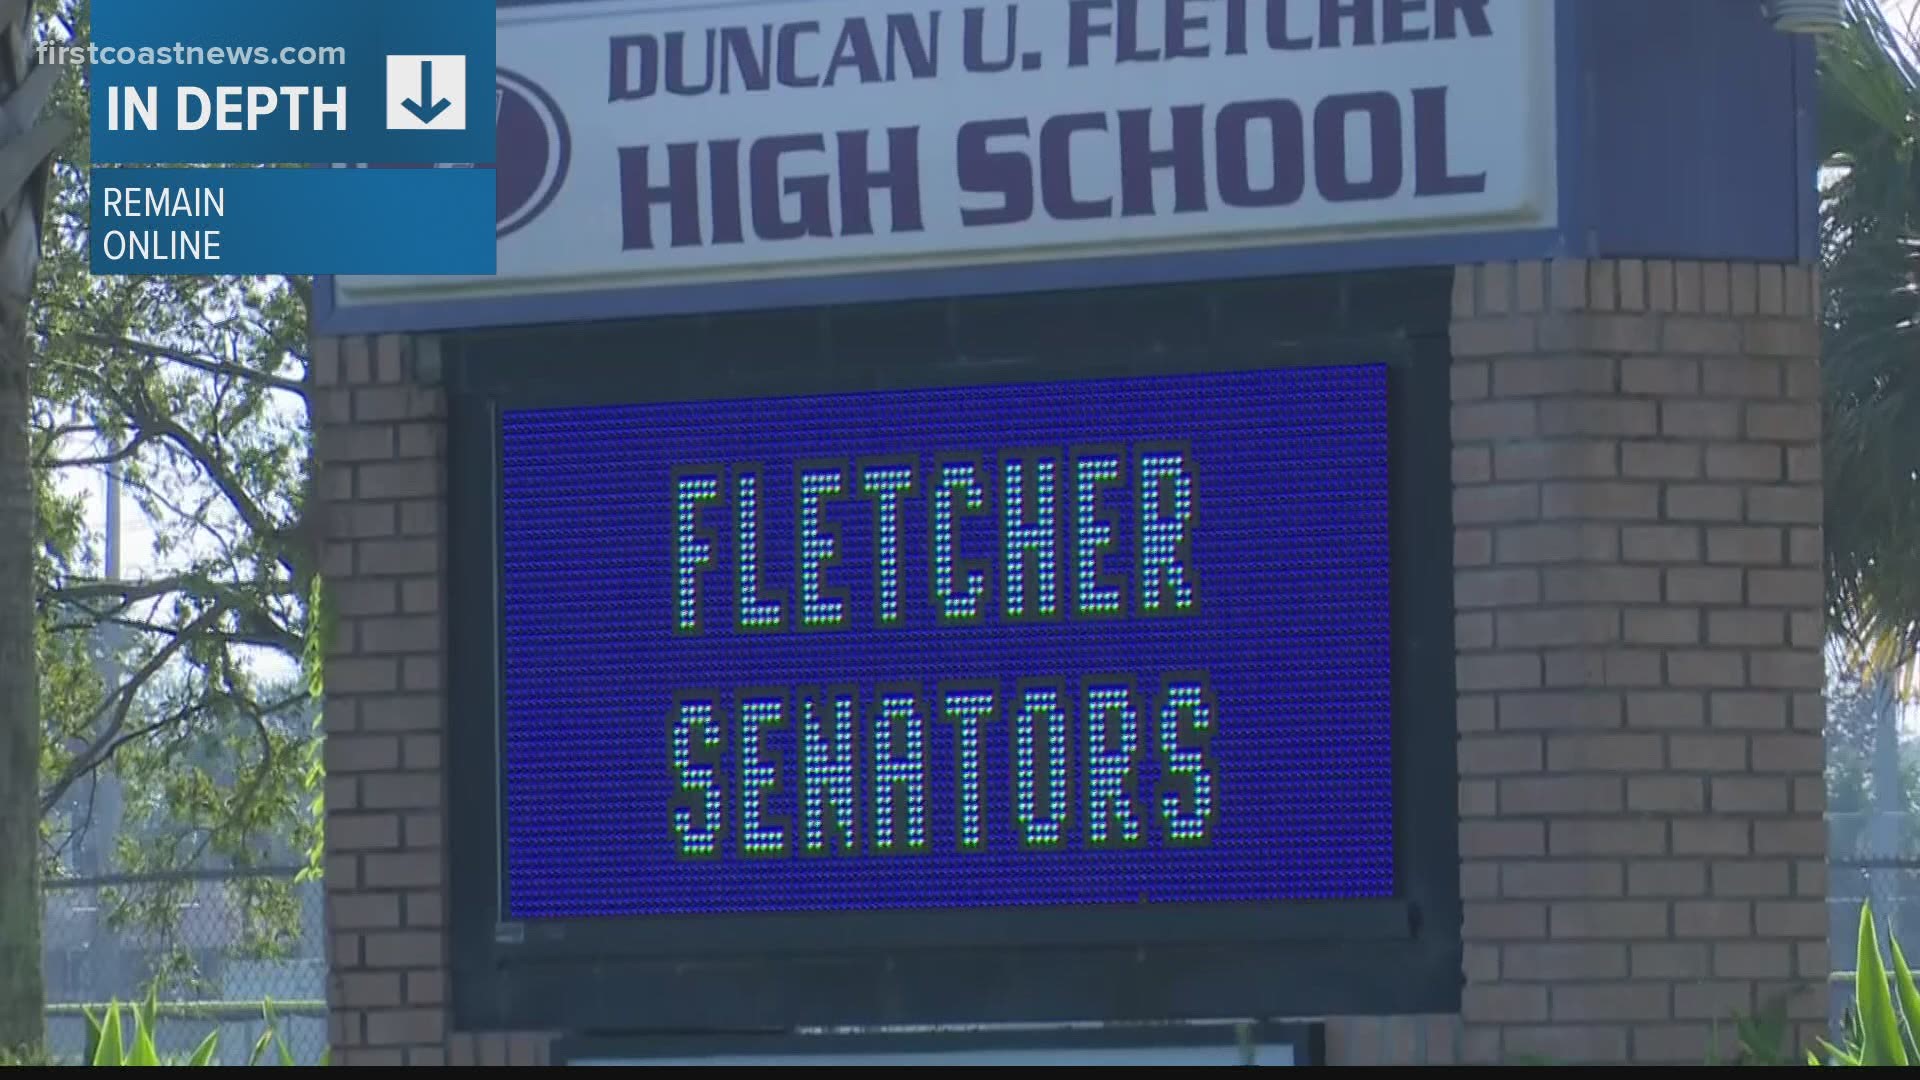 As of Sunday, the Florida Department of Health is reporting more than 30 COVID-19 cases linked to Fletcher High, according to an email from the school's principal.